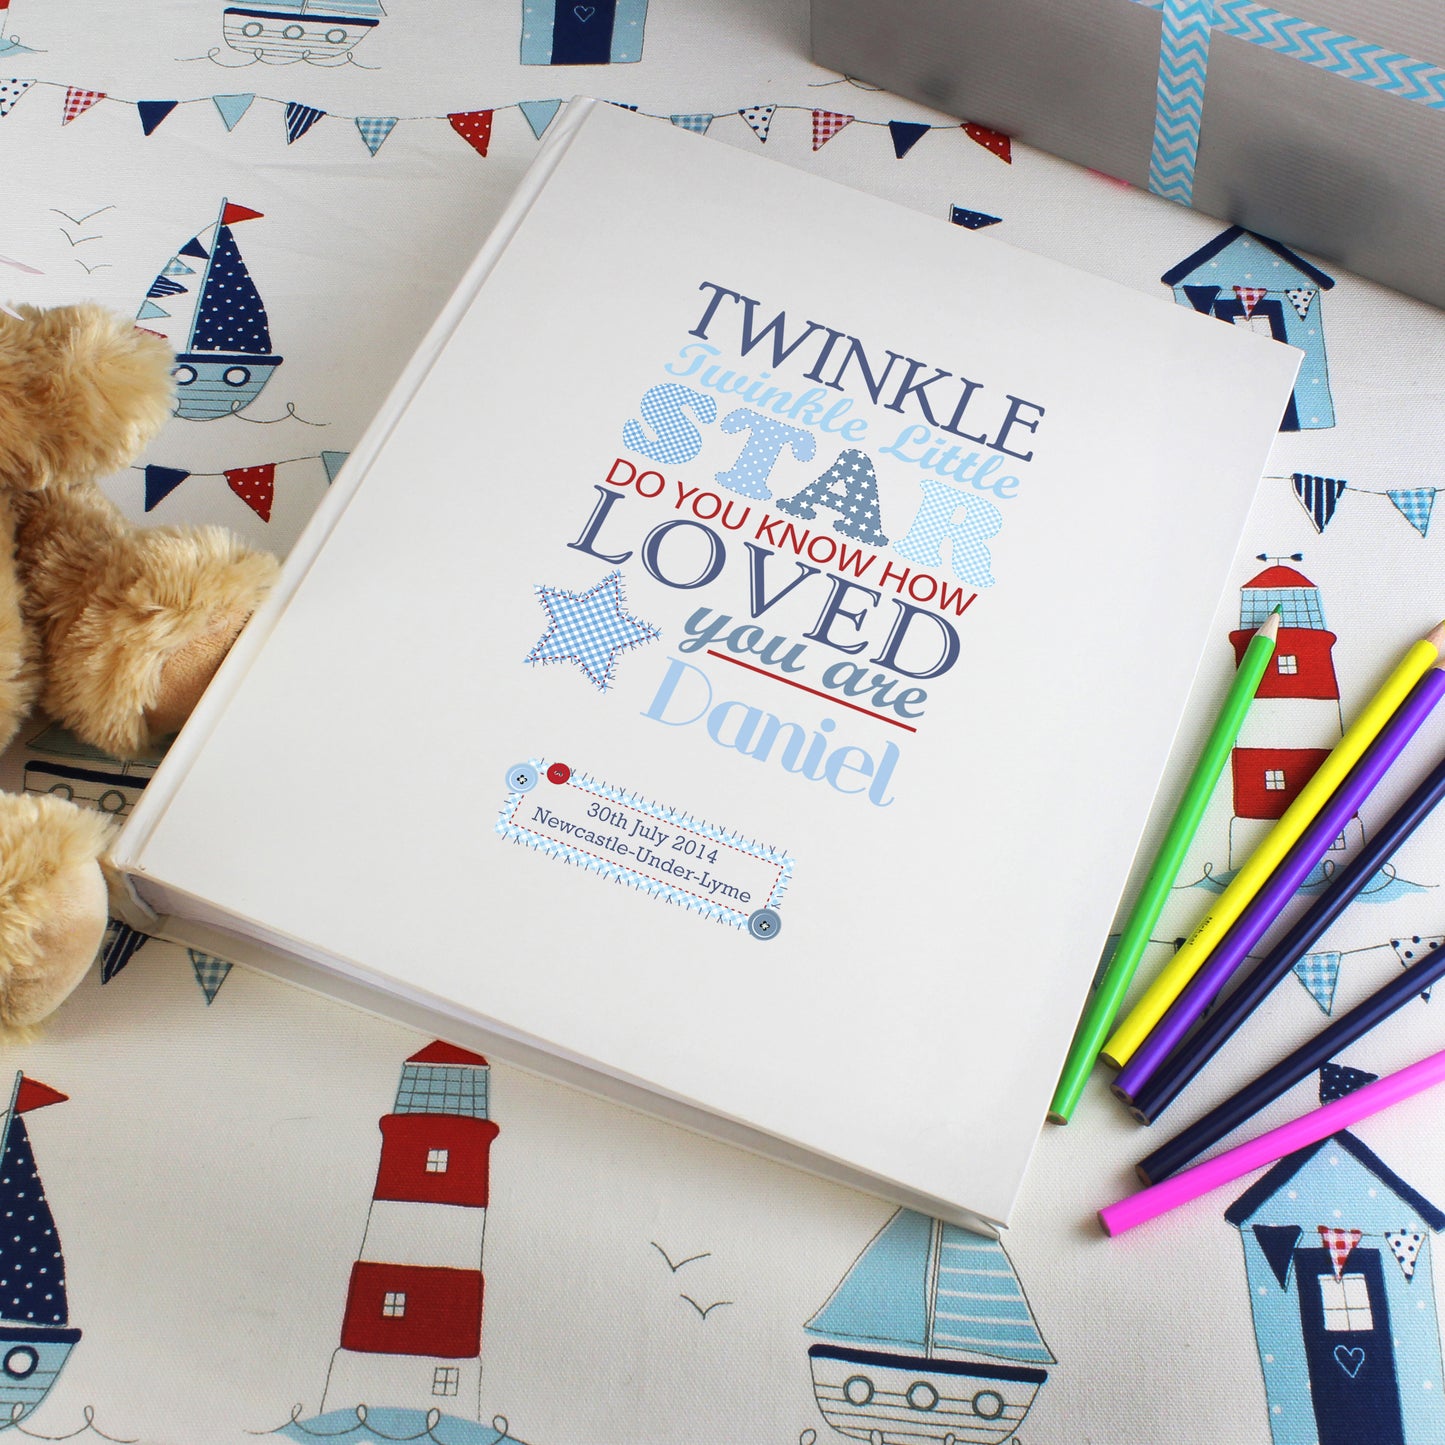 Personalised Twinkle Boys Traditional Album - Personalise It!